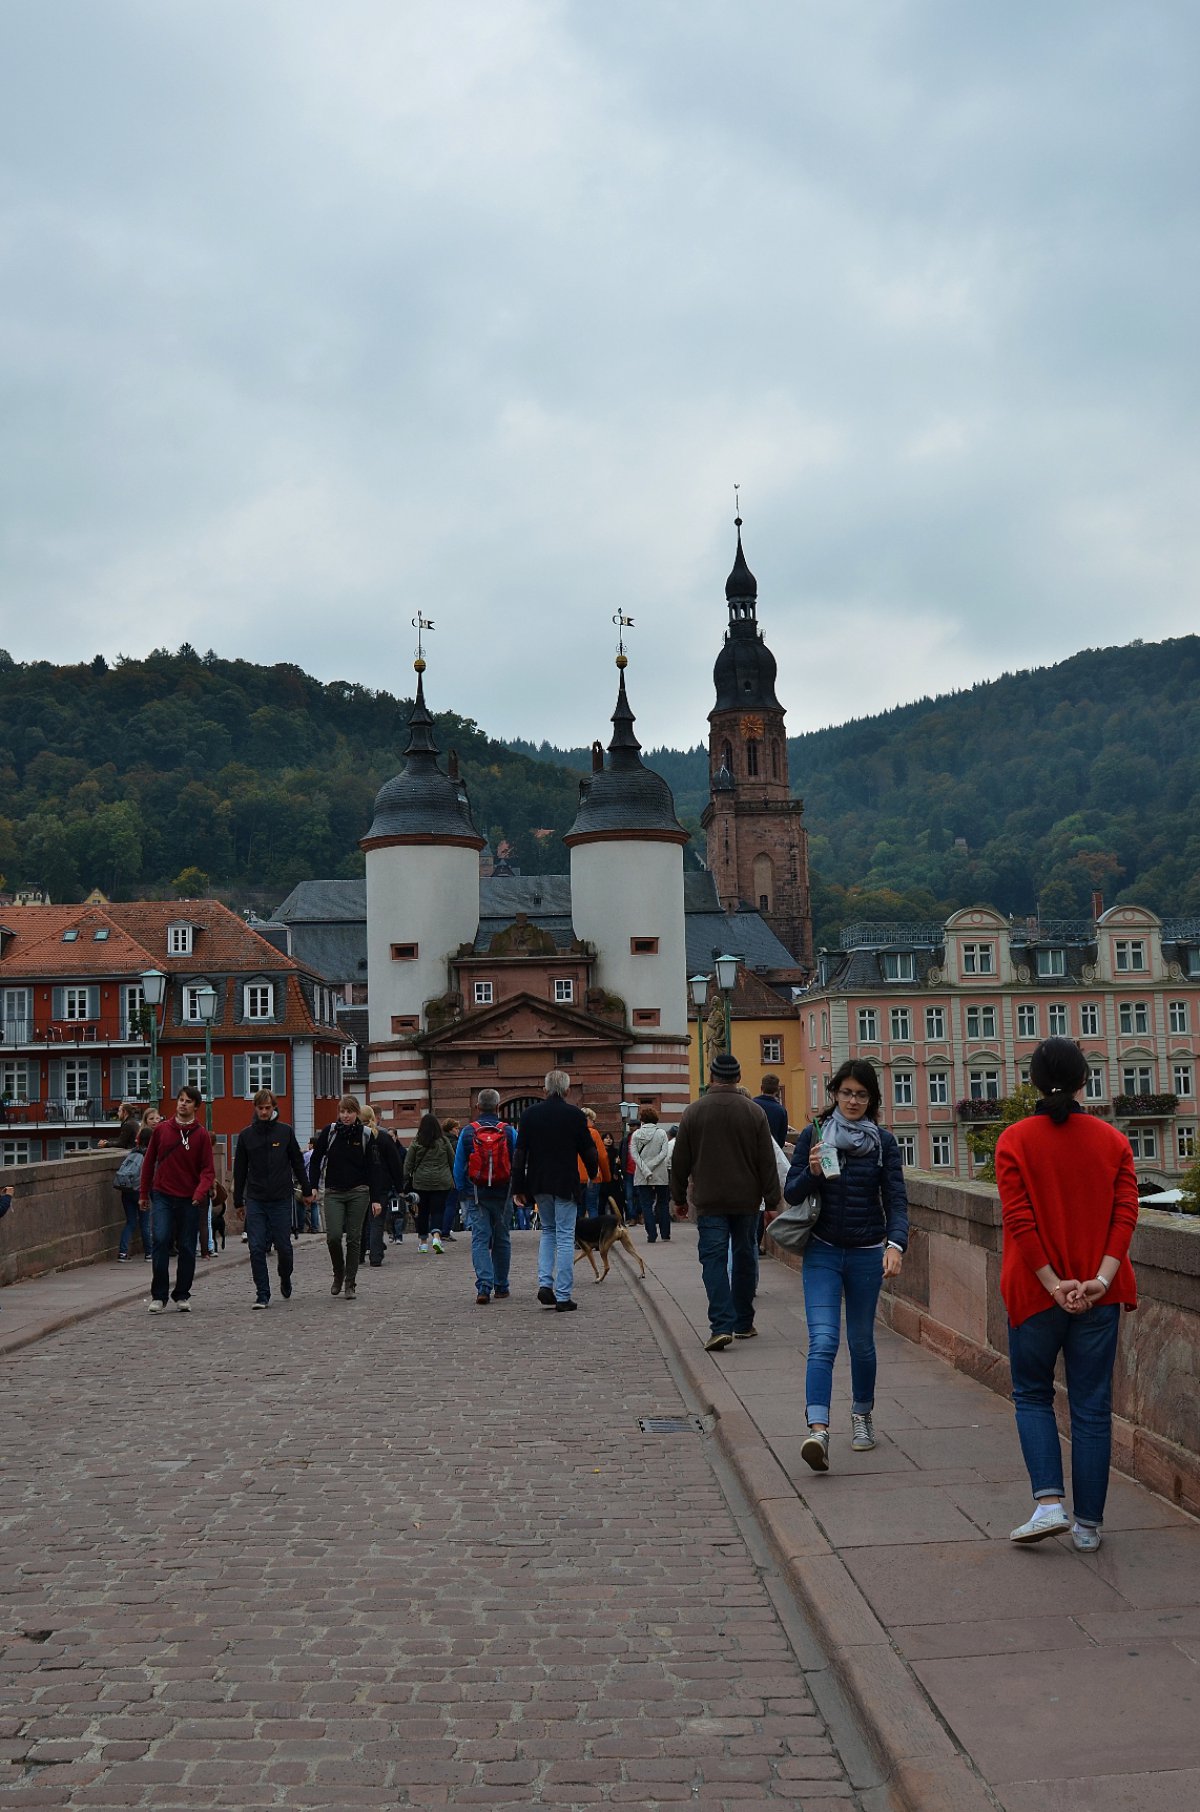 Heidelberg old town scenery pictures in Germany